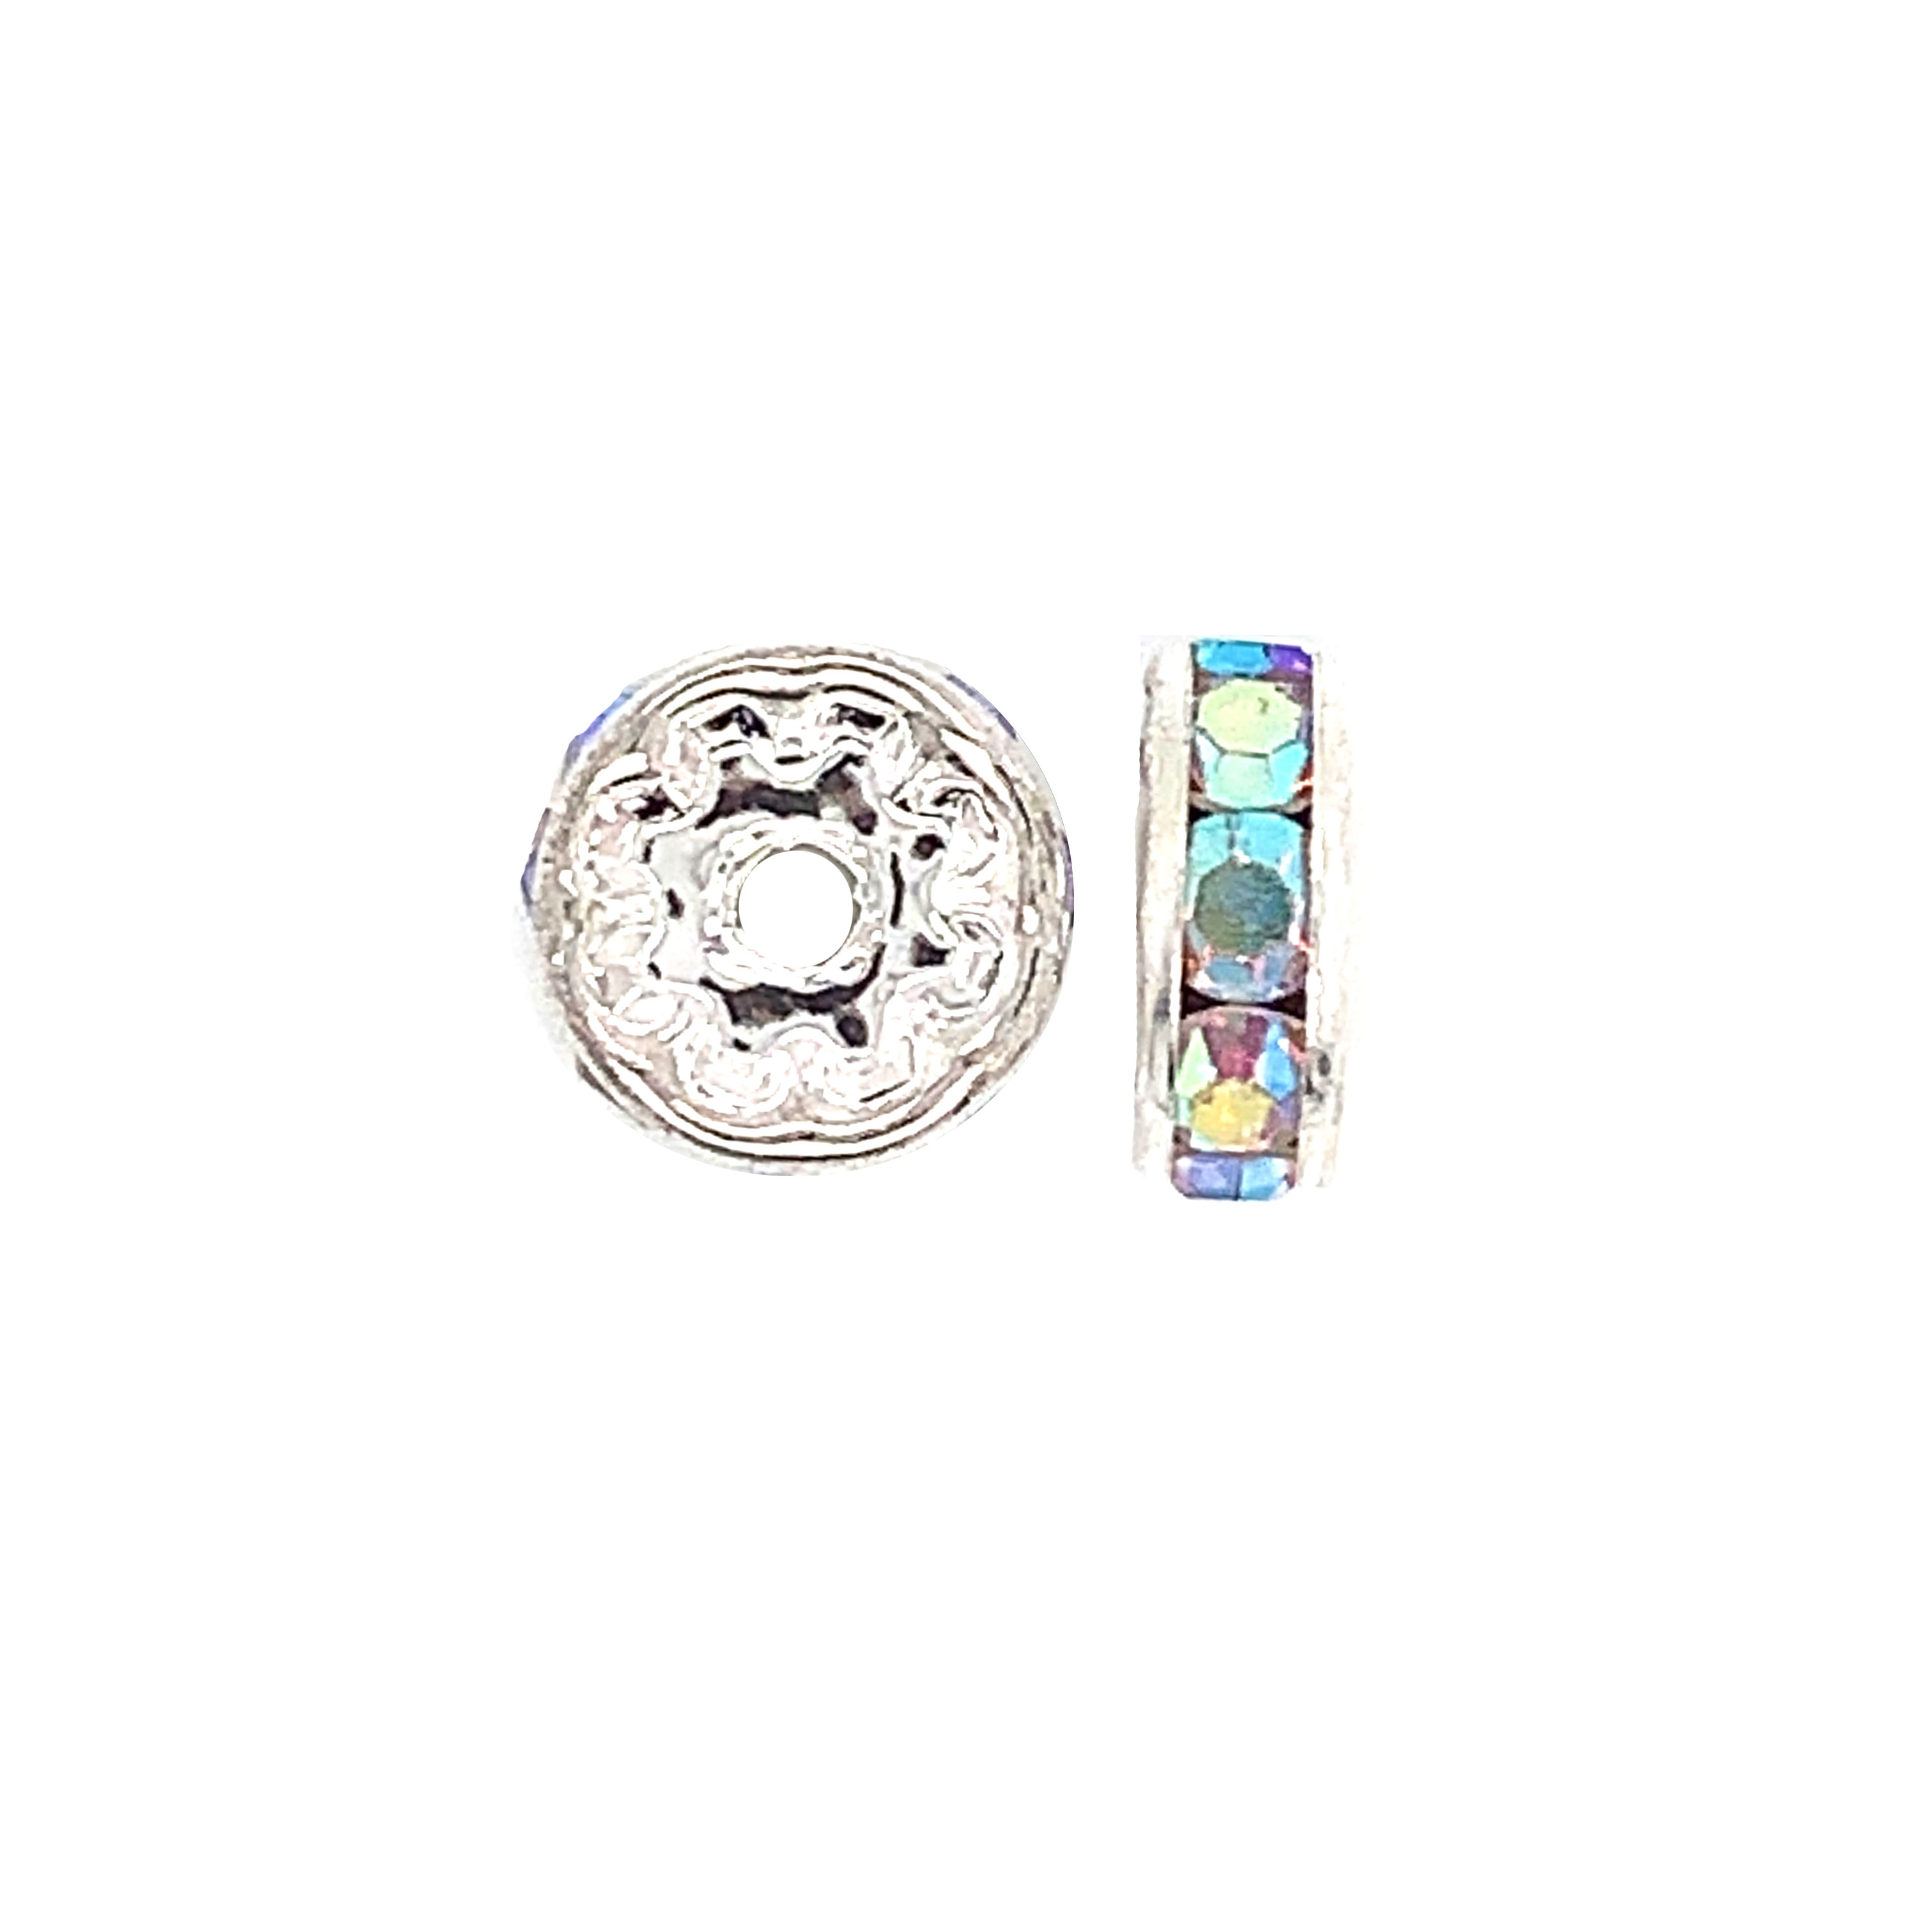 10mm AB Crystal Silver Tone Rondelle - Pack of 10